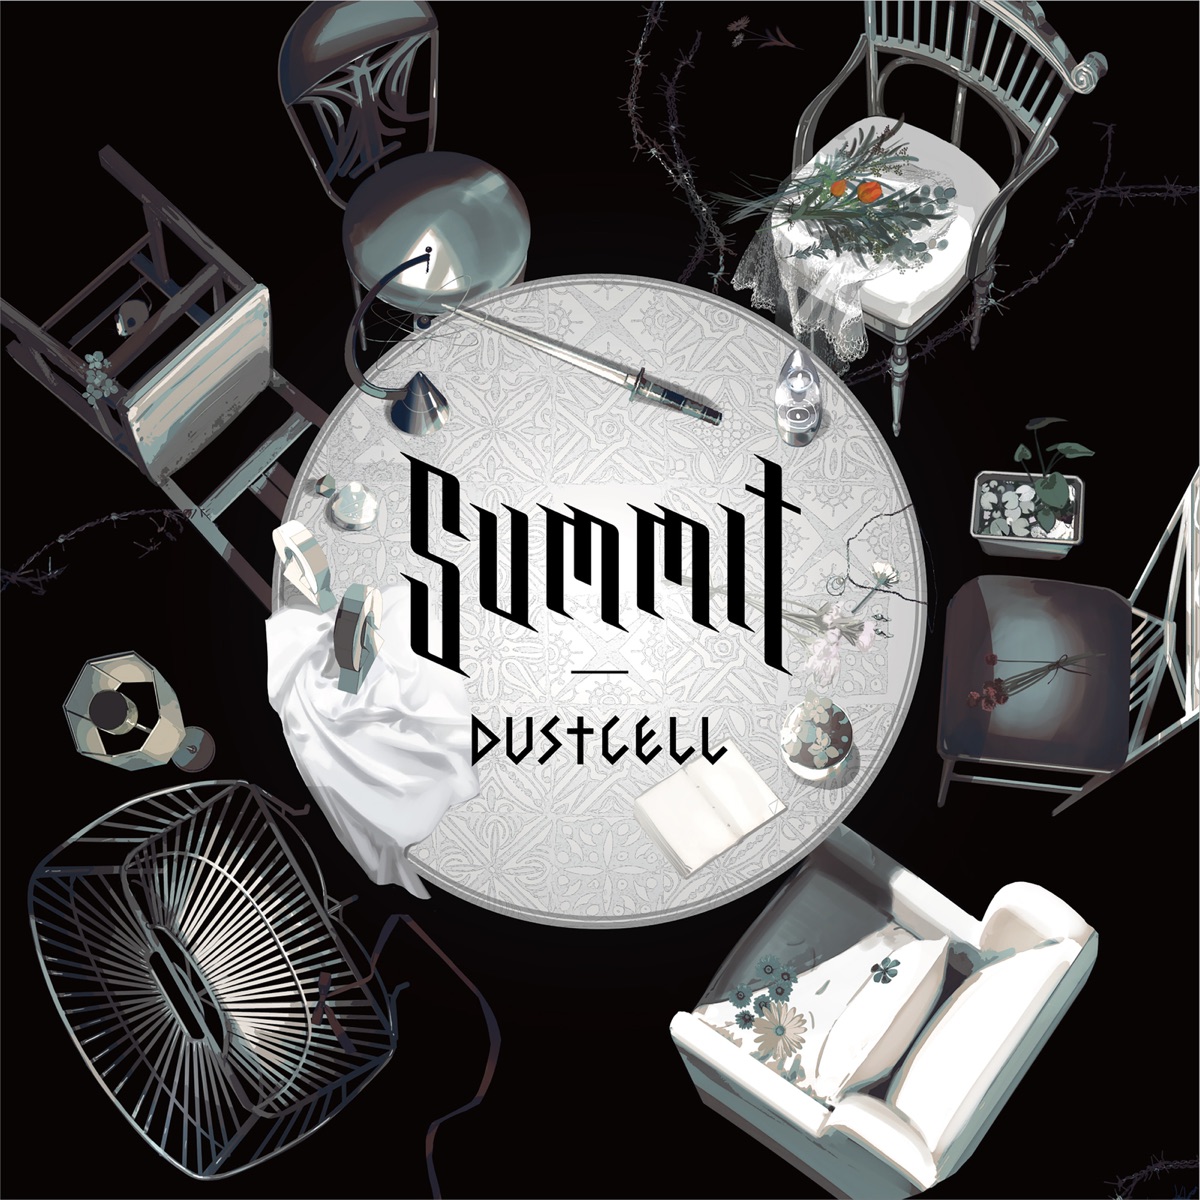 Cover for『DUSTCELL - End Point』from the release『SUMMIT』